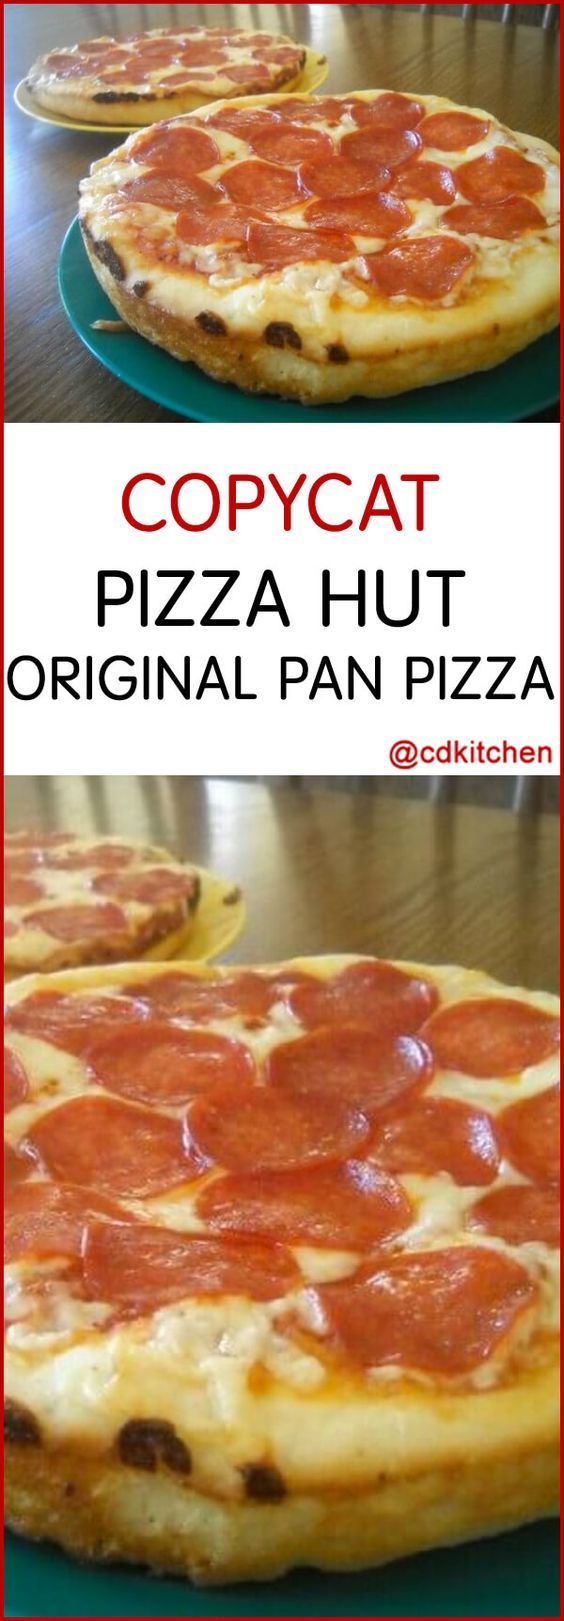 Make your own Pizza Hut pan pizza at home. This copycat recipe for the crust and sauce tastes just like the pizzas you get at Pizza Hut. | CDKitchen.com -   22 home made pizza recipes
 ideas